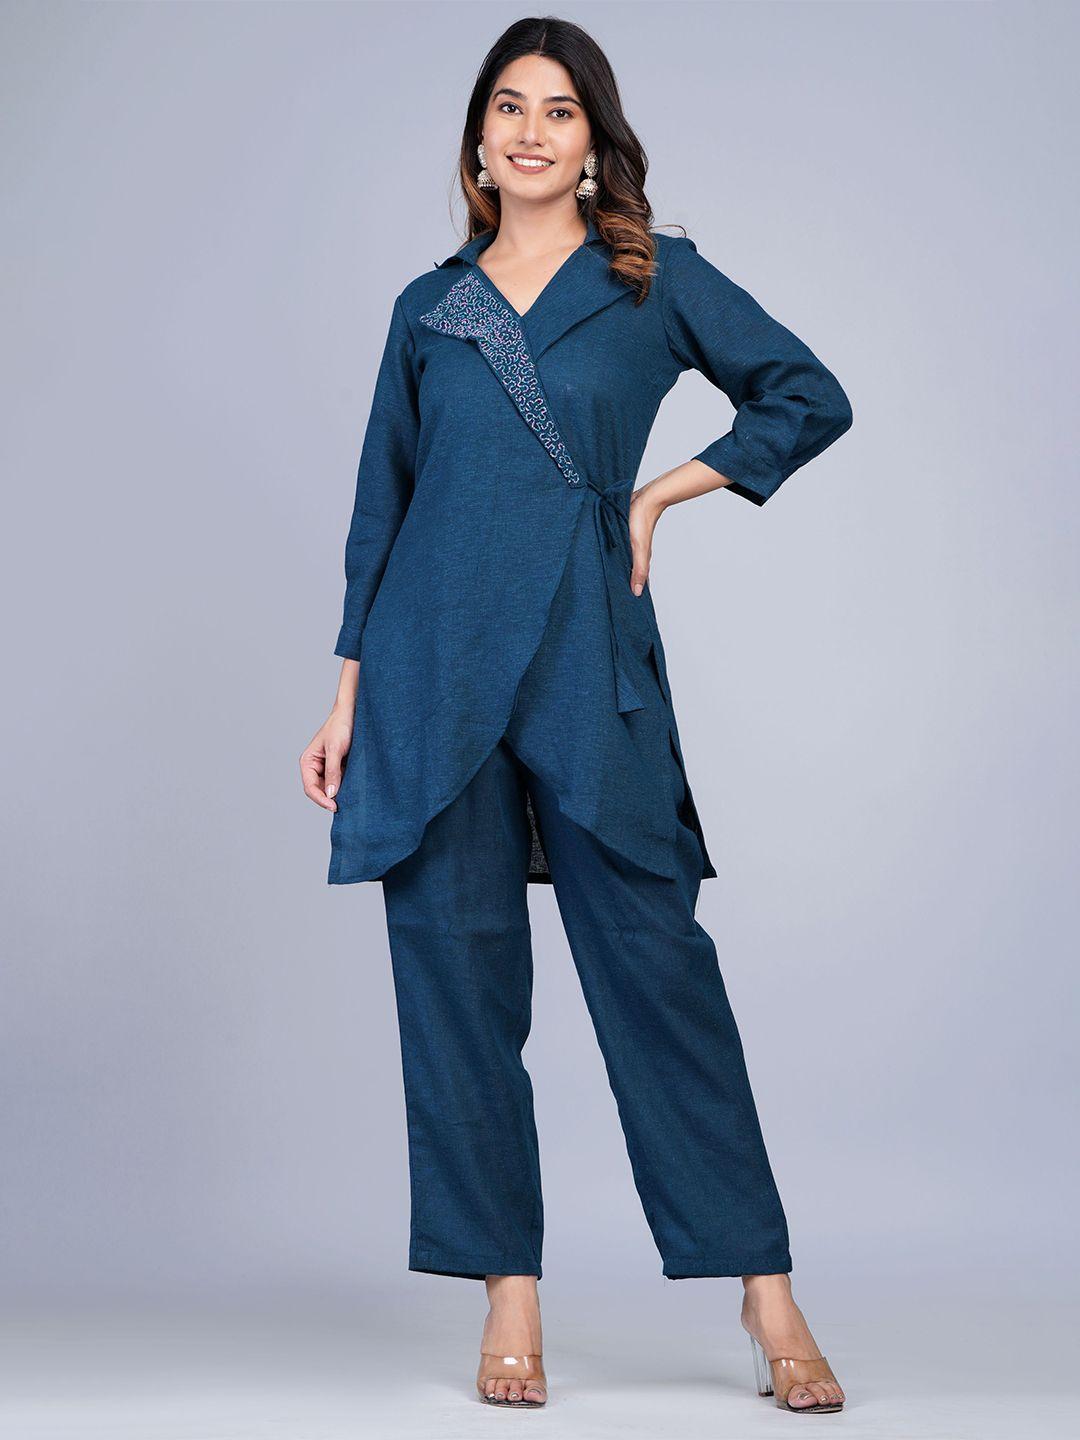 shikhaa style embellished shirt collar waist tie-ups linen shirt with trousers